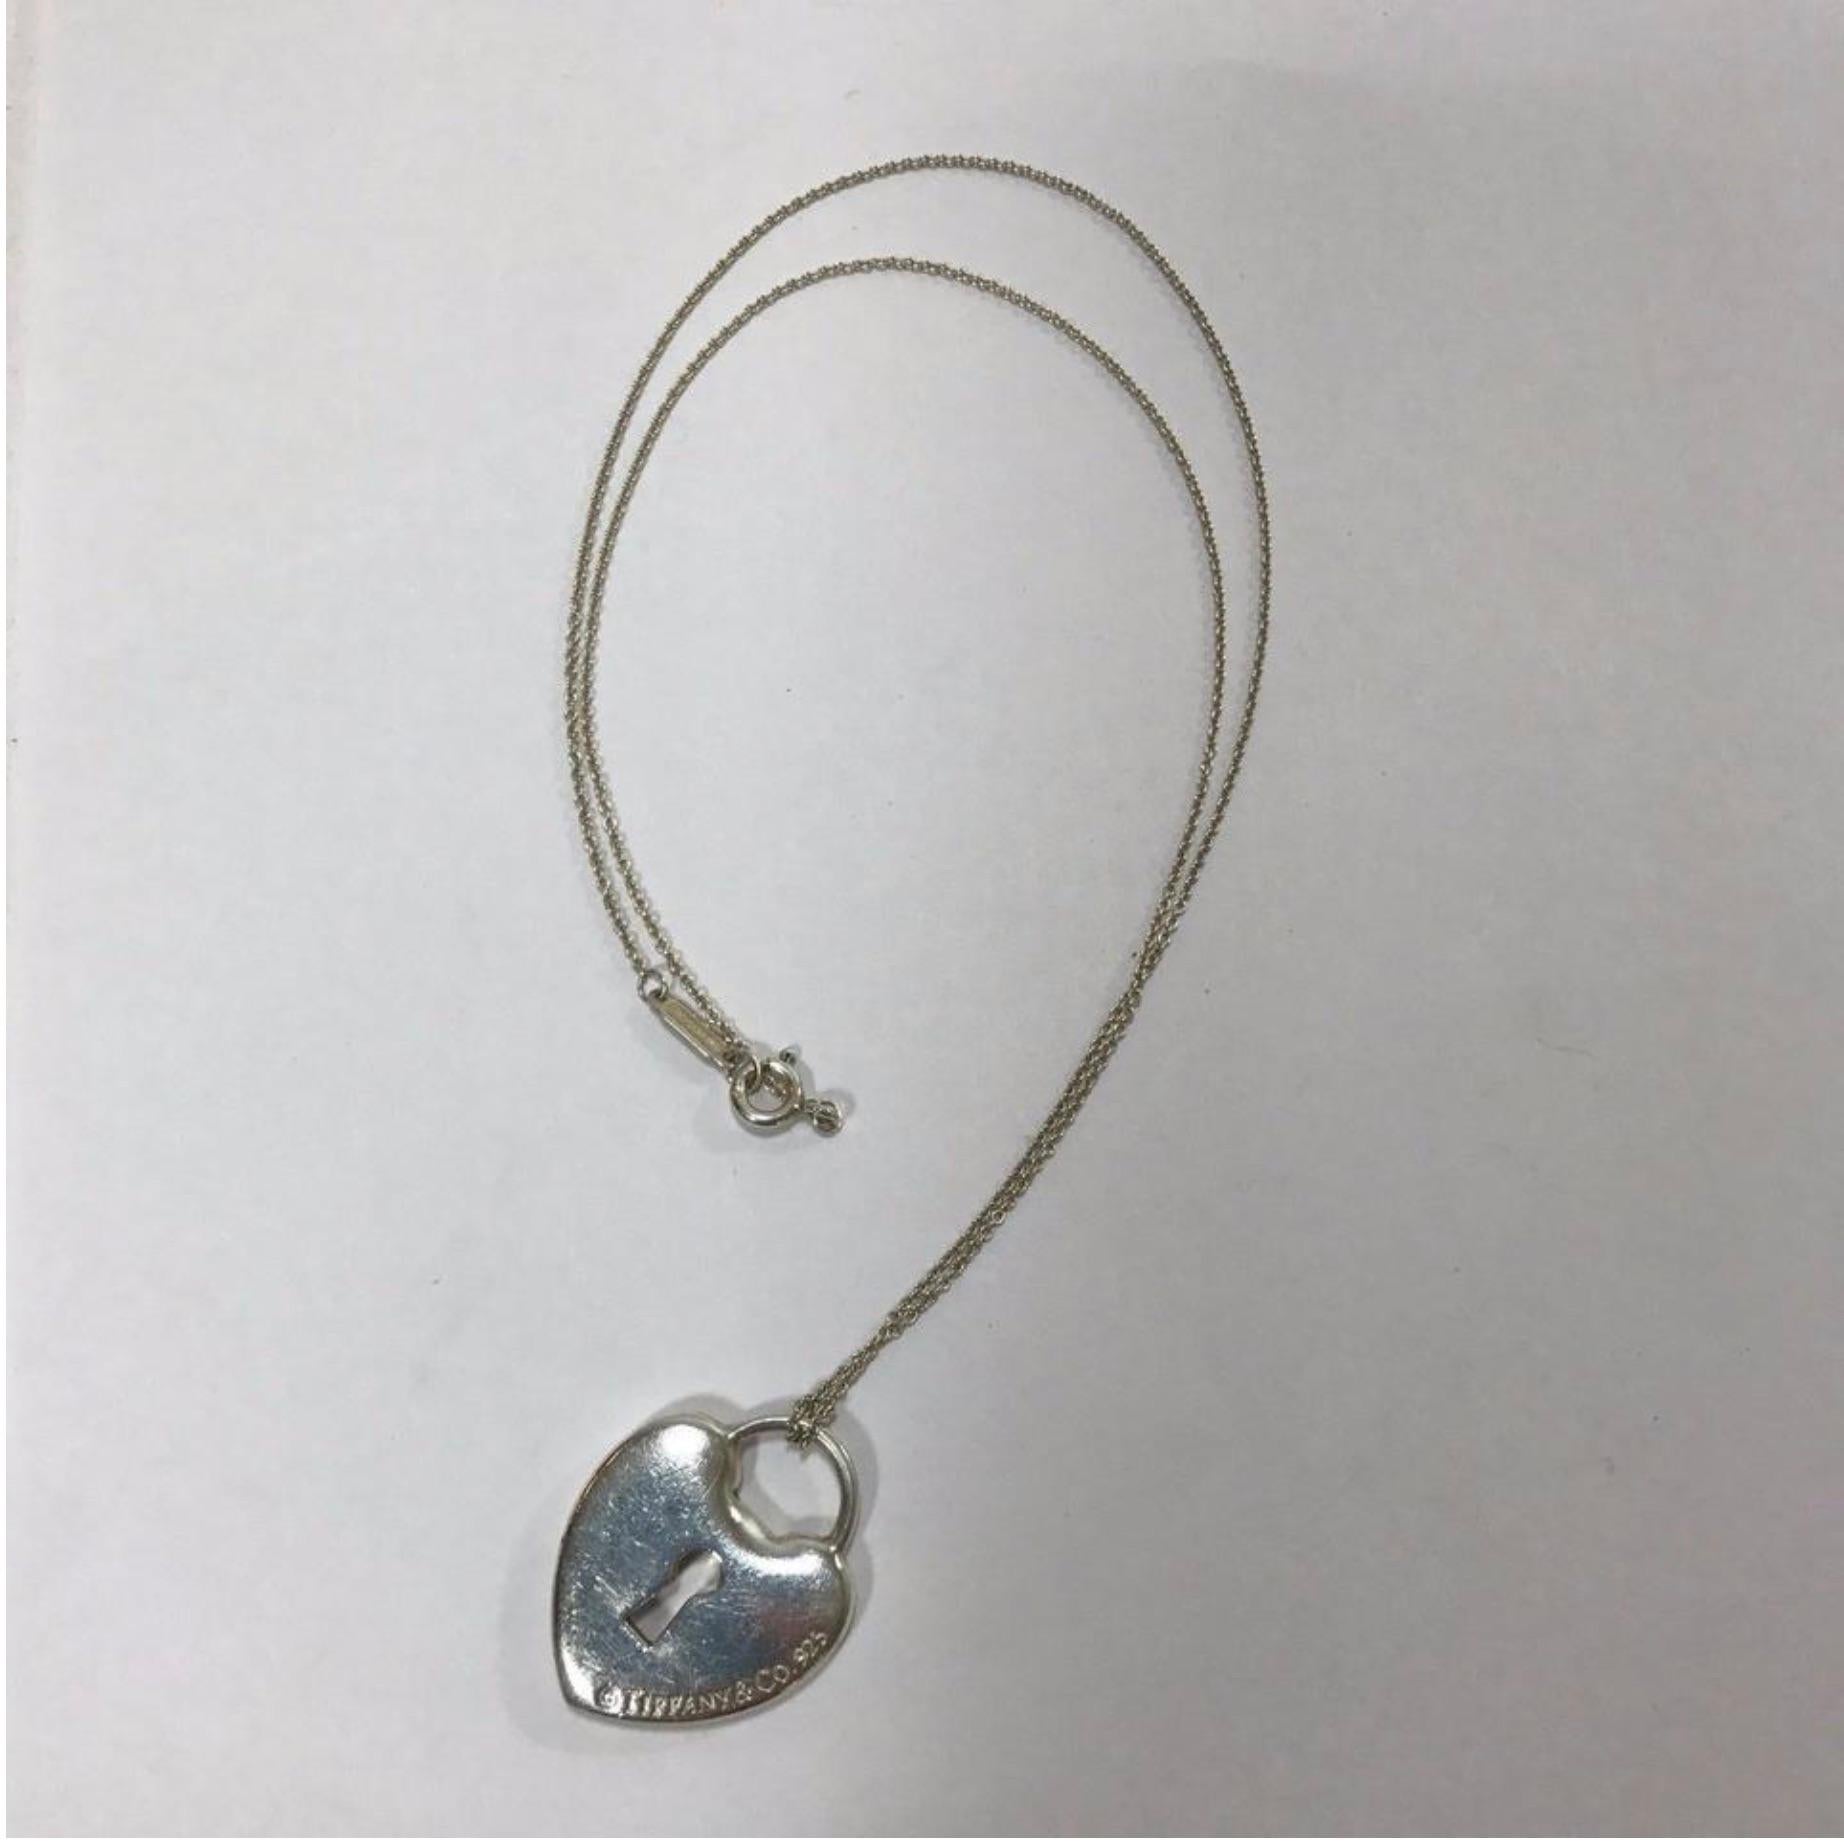 Tiffany & Co. Silver Heart Padlock Charm Necklace In Excellent Condition For Sale In Saint Charles, IL